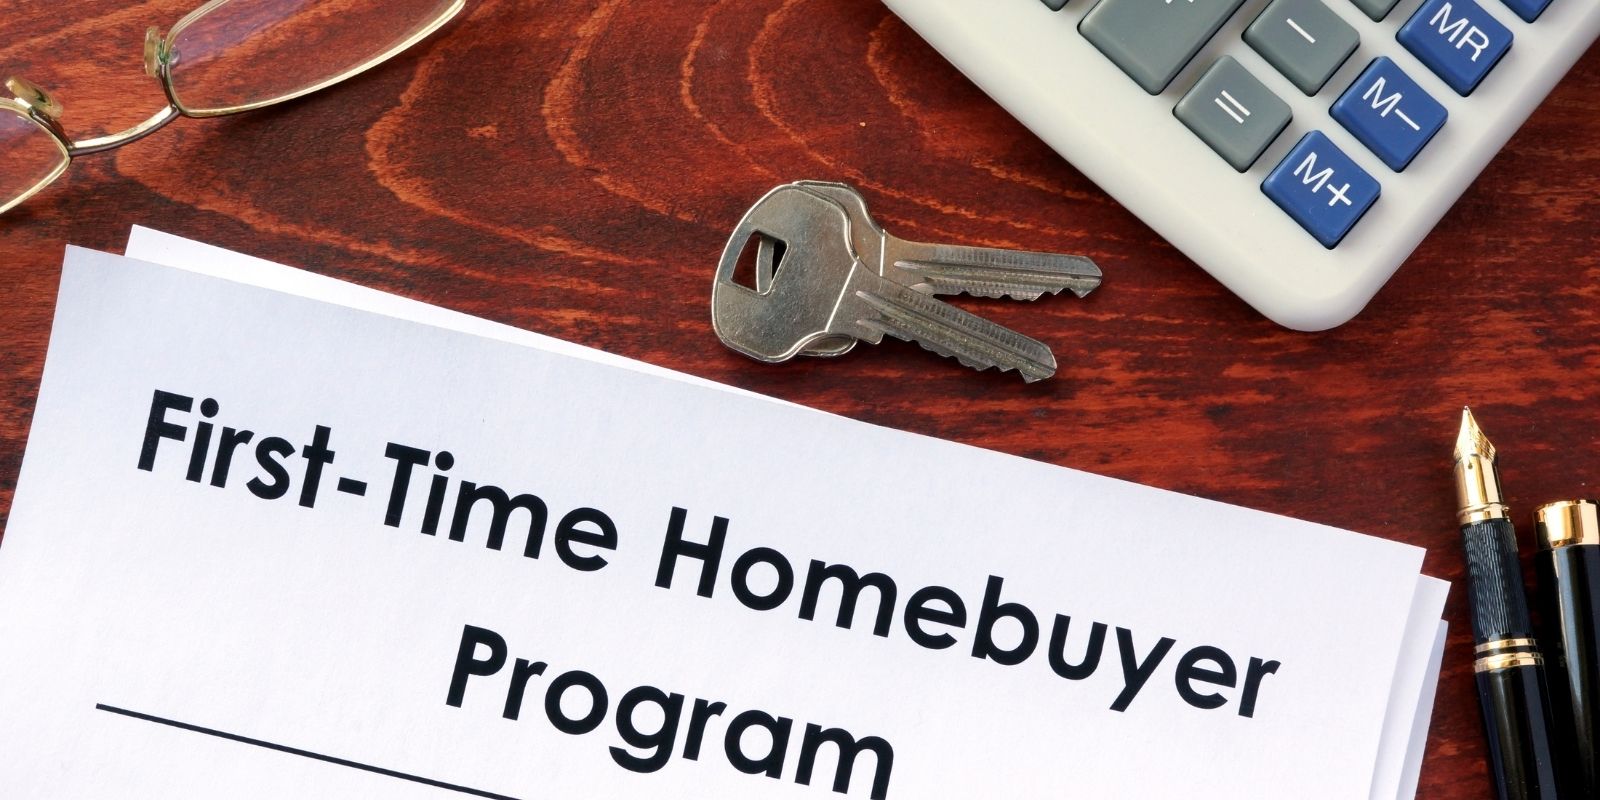 10. Ignoring State & Local First-Time Homebuyer Programs